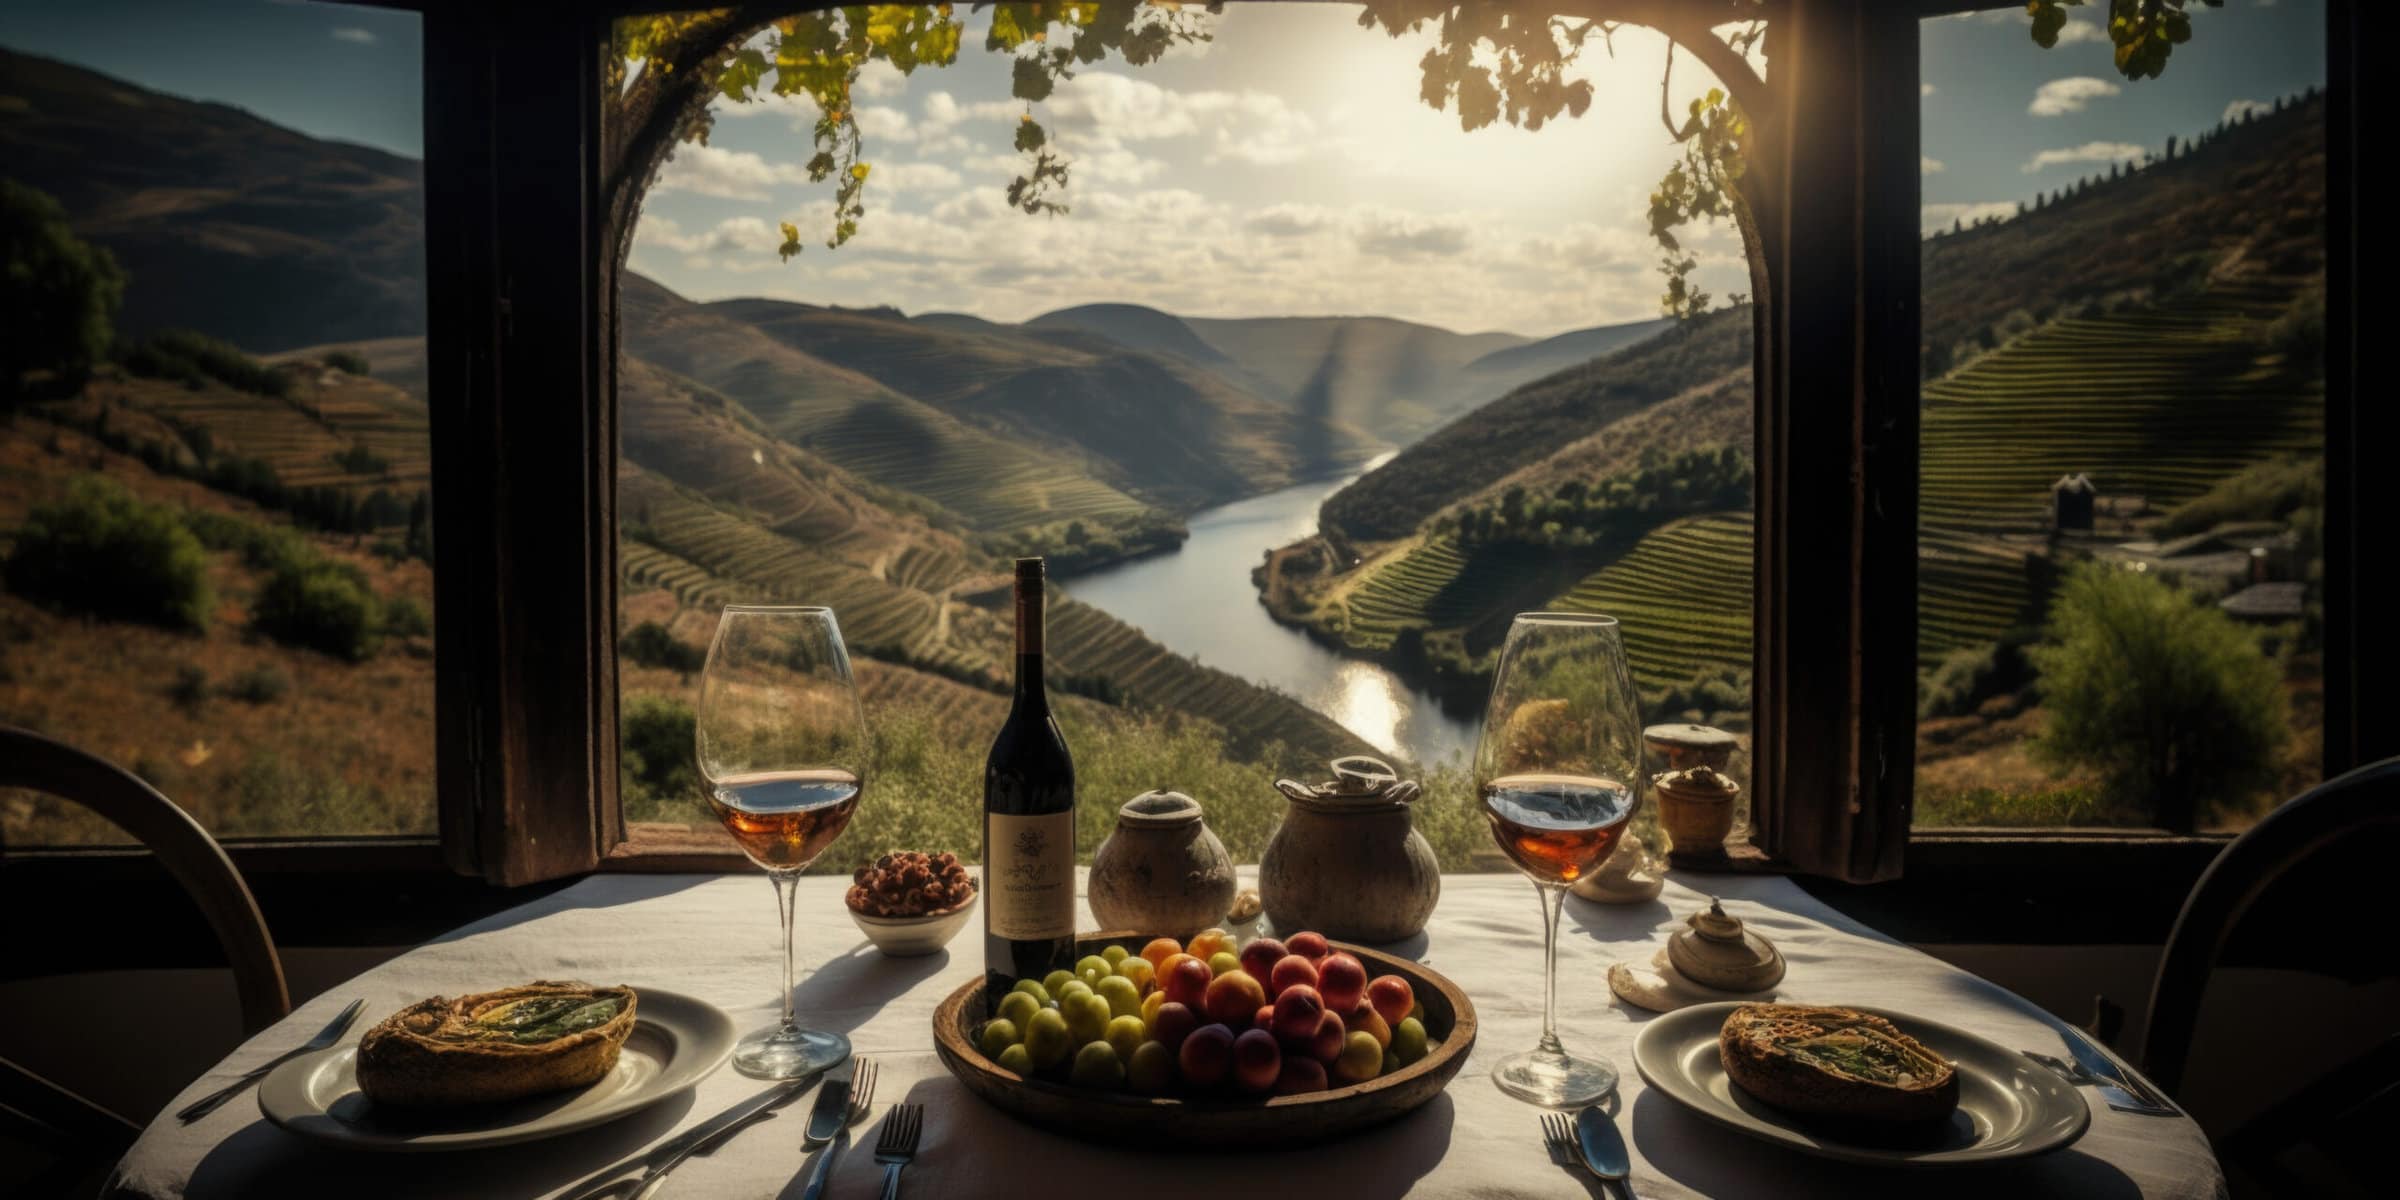 Portugal's Douro Valley: A Wine Connoisseur's Paradise